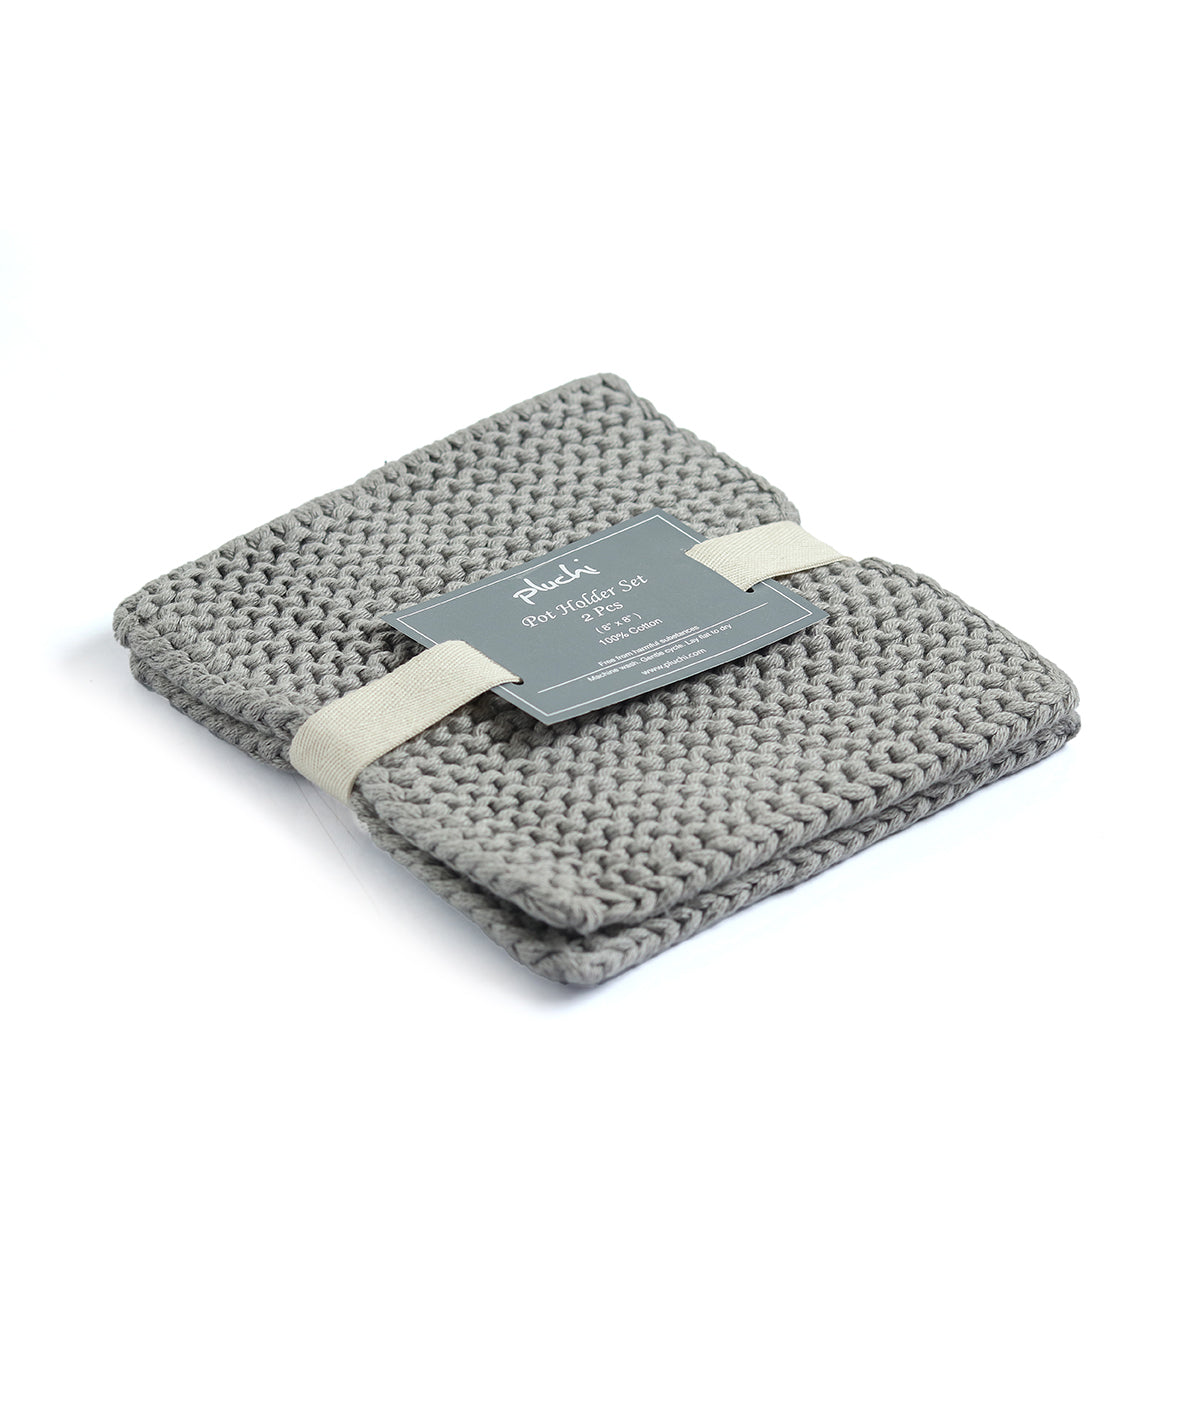 Pot holder - Cotton Knitted Pot placement mat /Pot Holder/Pot Coaster in Grey Color (Multi Purpose) Set of 2